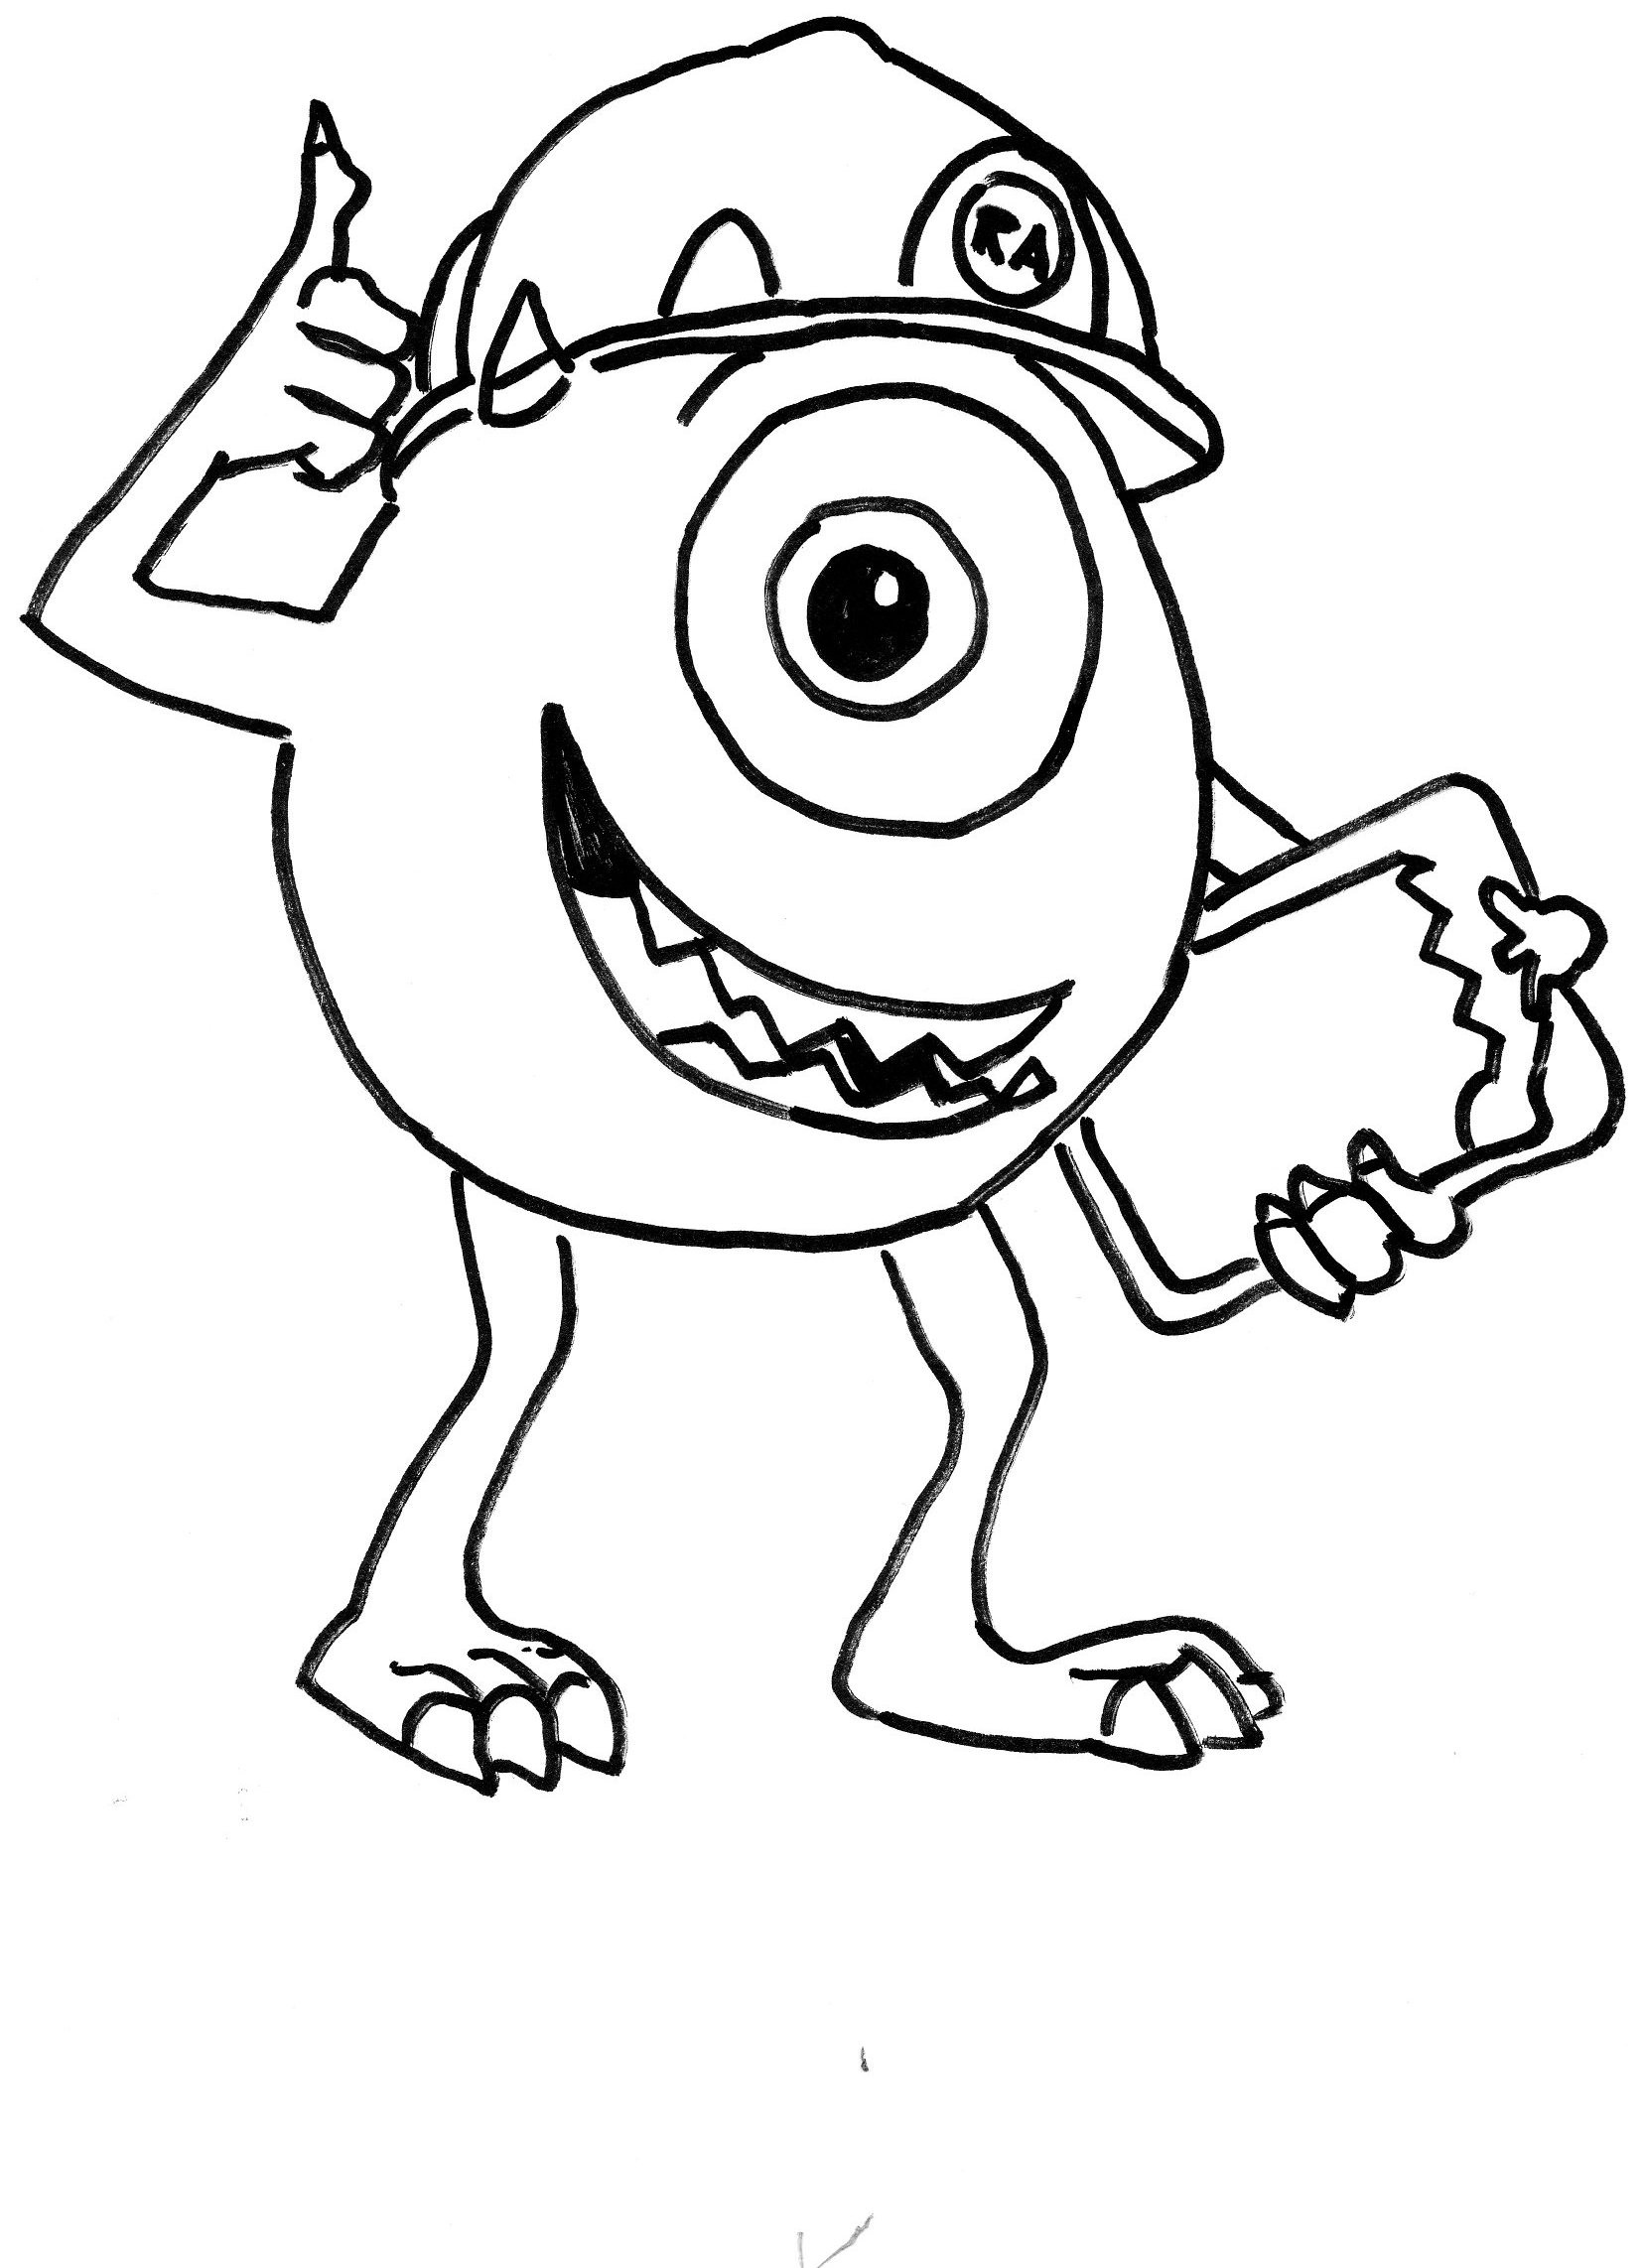 Coloring Pages Printable For Boys
 Coloring Pages for Boys 2018 Dr Odd